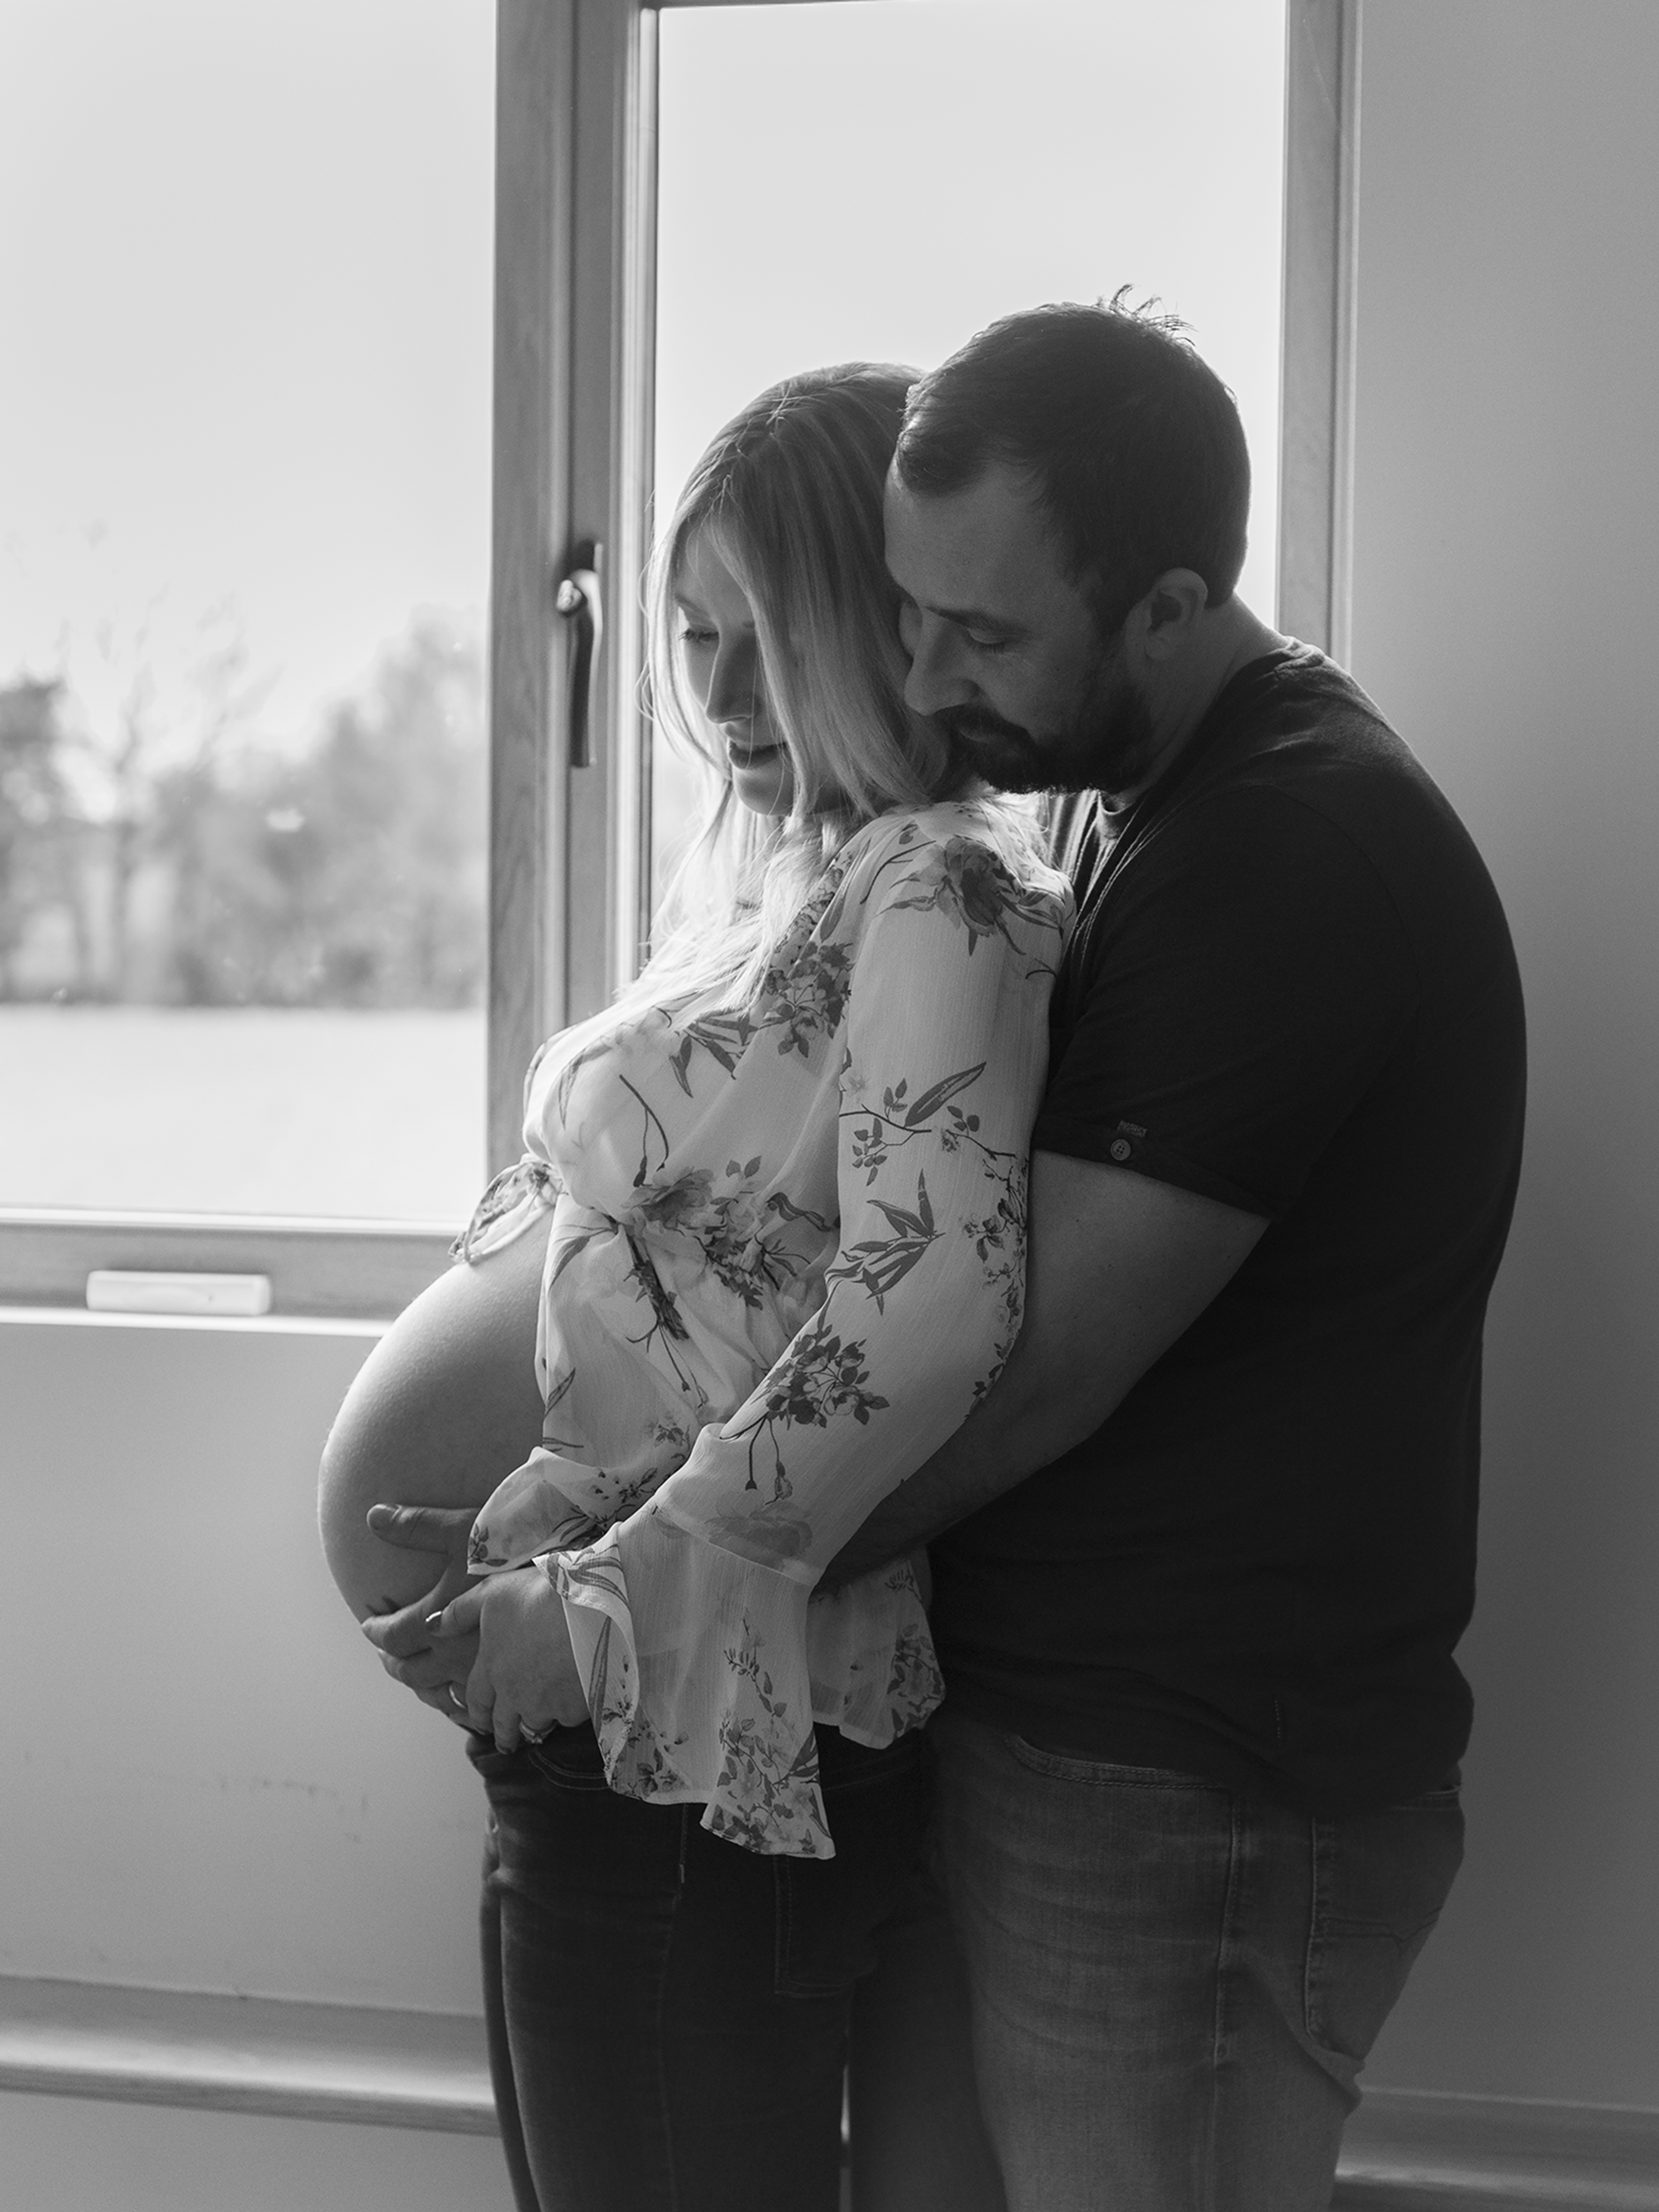 Lifestyle maternity photoshoot in Essex of couple at window in black and white